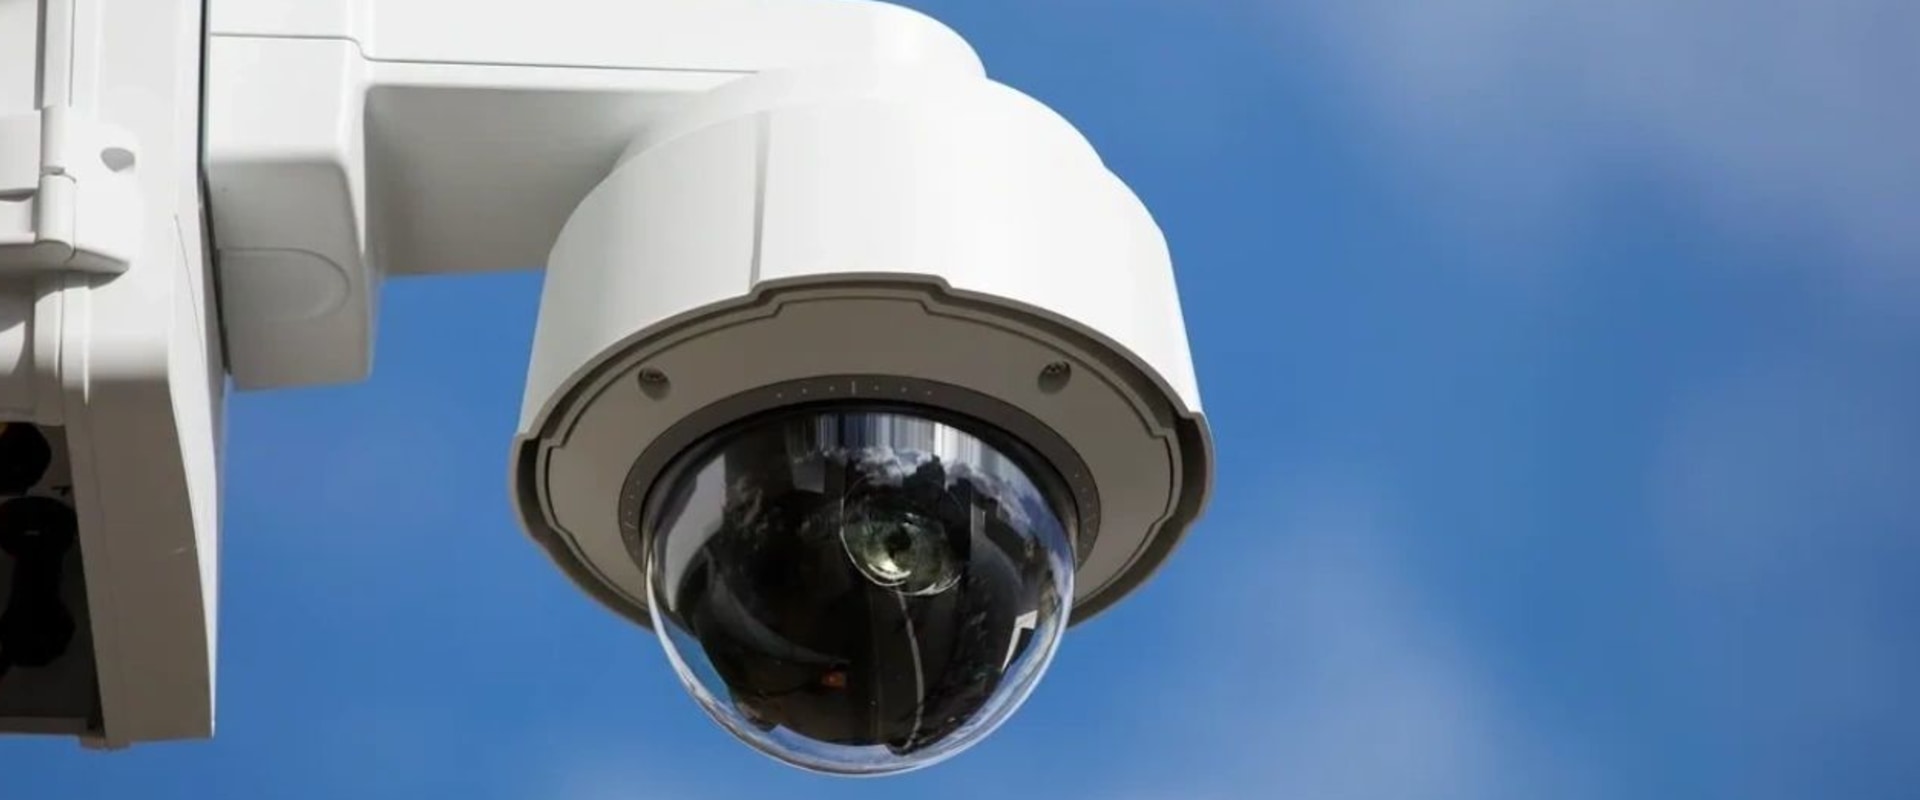 PTZ Cameras: An Overview of Features and Benefits